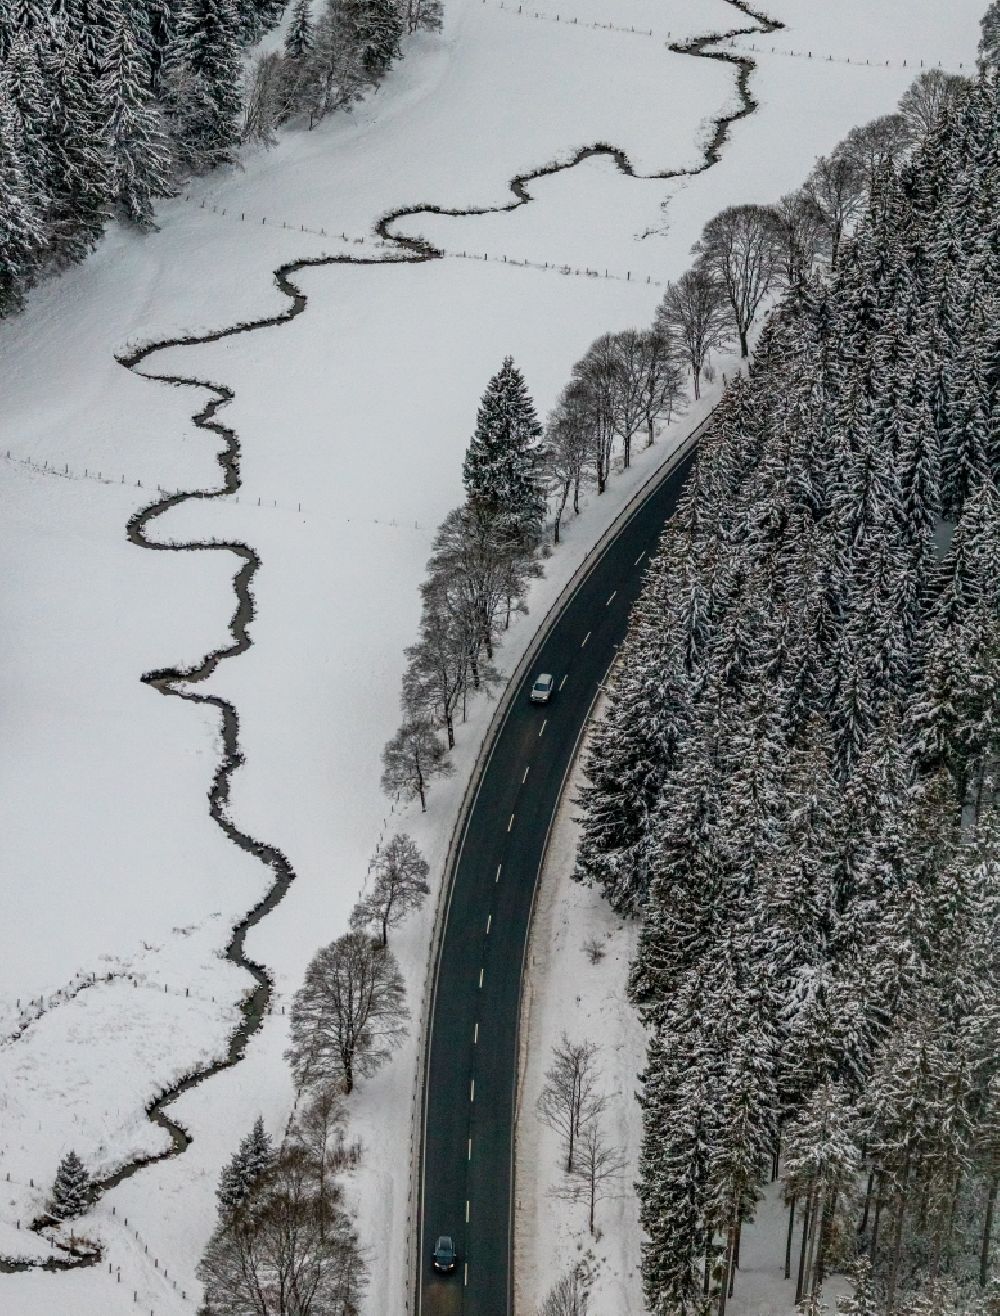 Winterberg from the bird's eye view: Wintry snowy serpentine curve of a river Ruhr in Oberen Ruhrtal in Winterberg at Sauerland in the state North Rhine-Westphalia, Germany